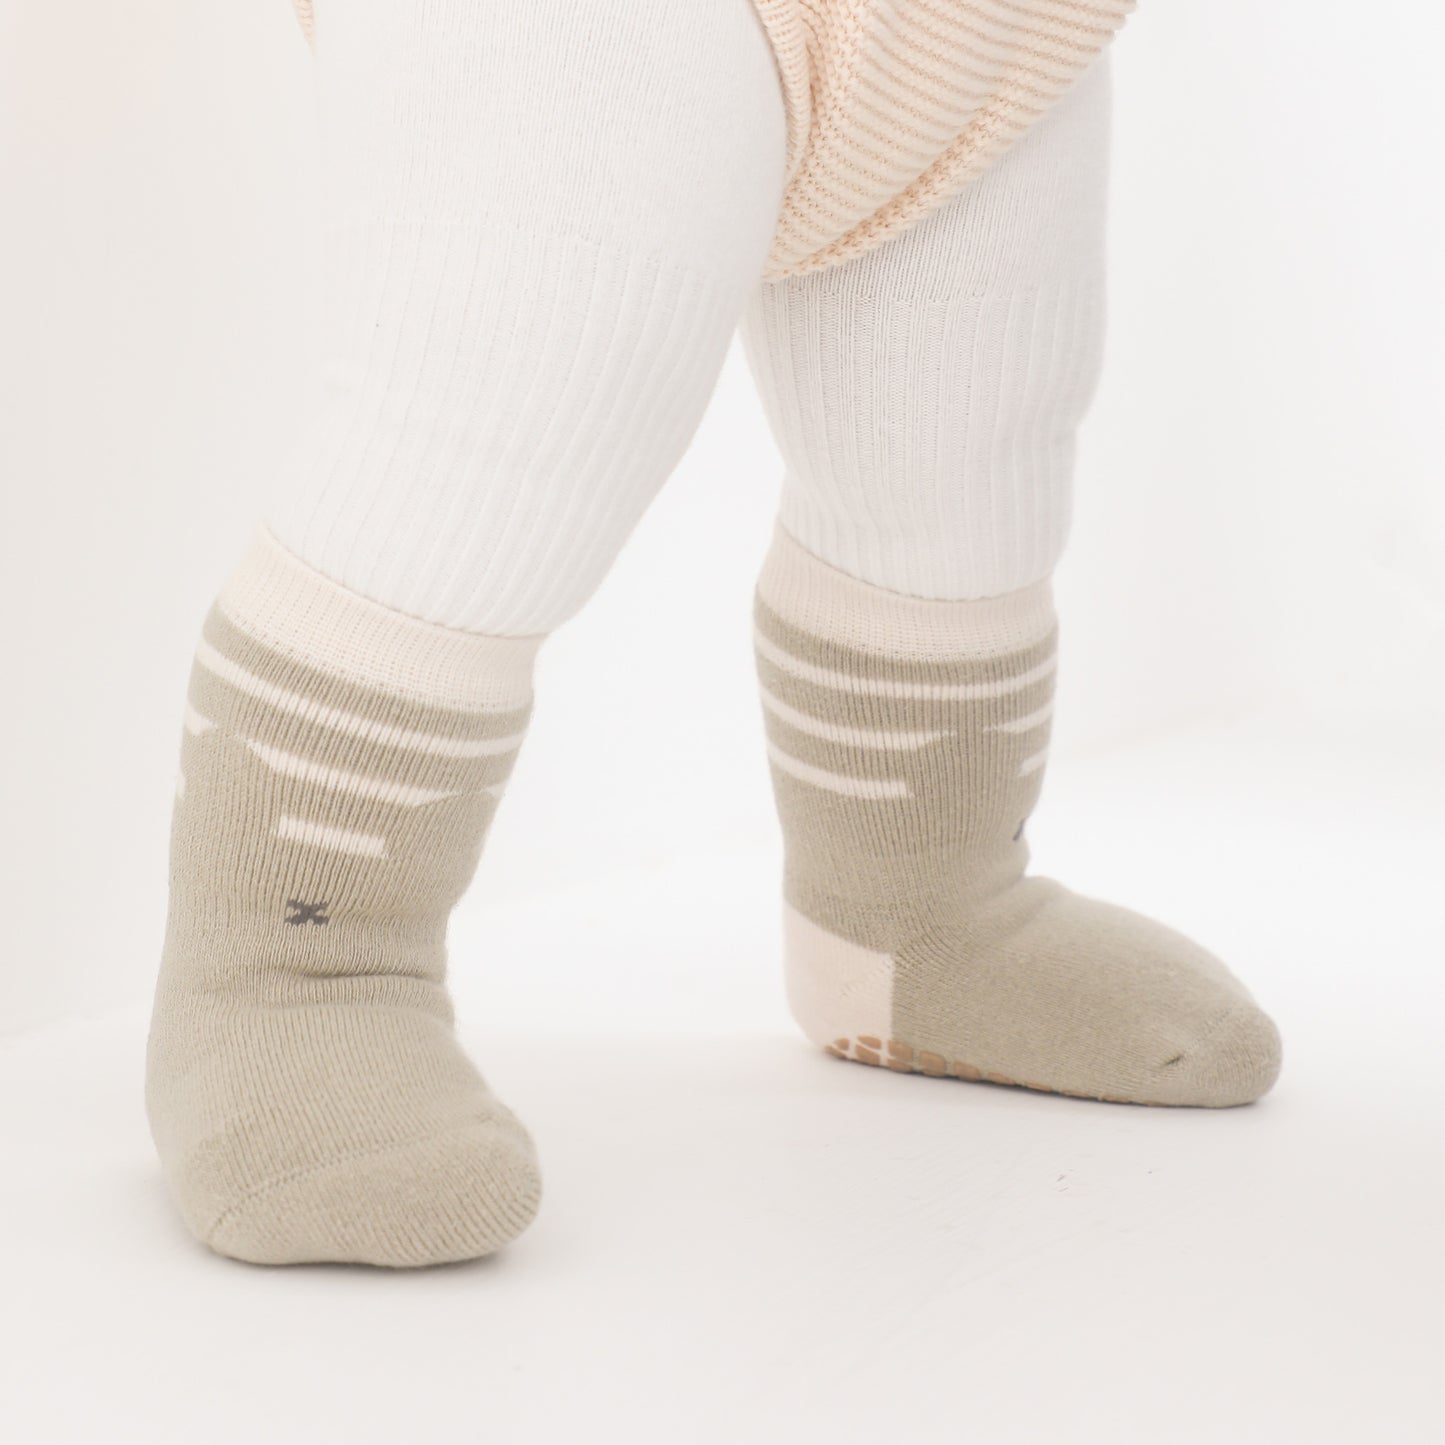 New-Mini Ear- Extra Warm - 4 Pairs of Stay-On Baby & Toddler Non-Slip Socks